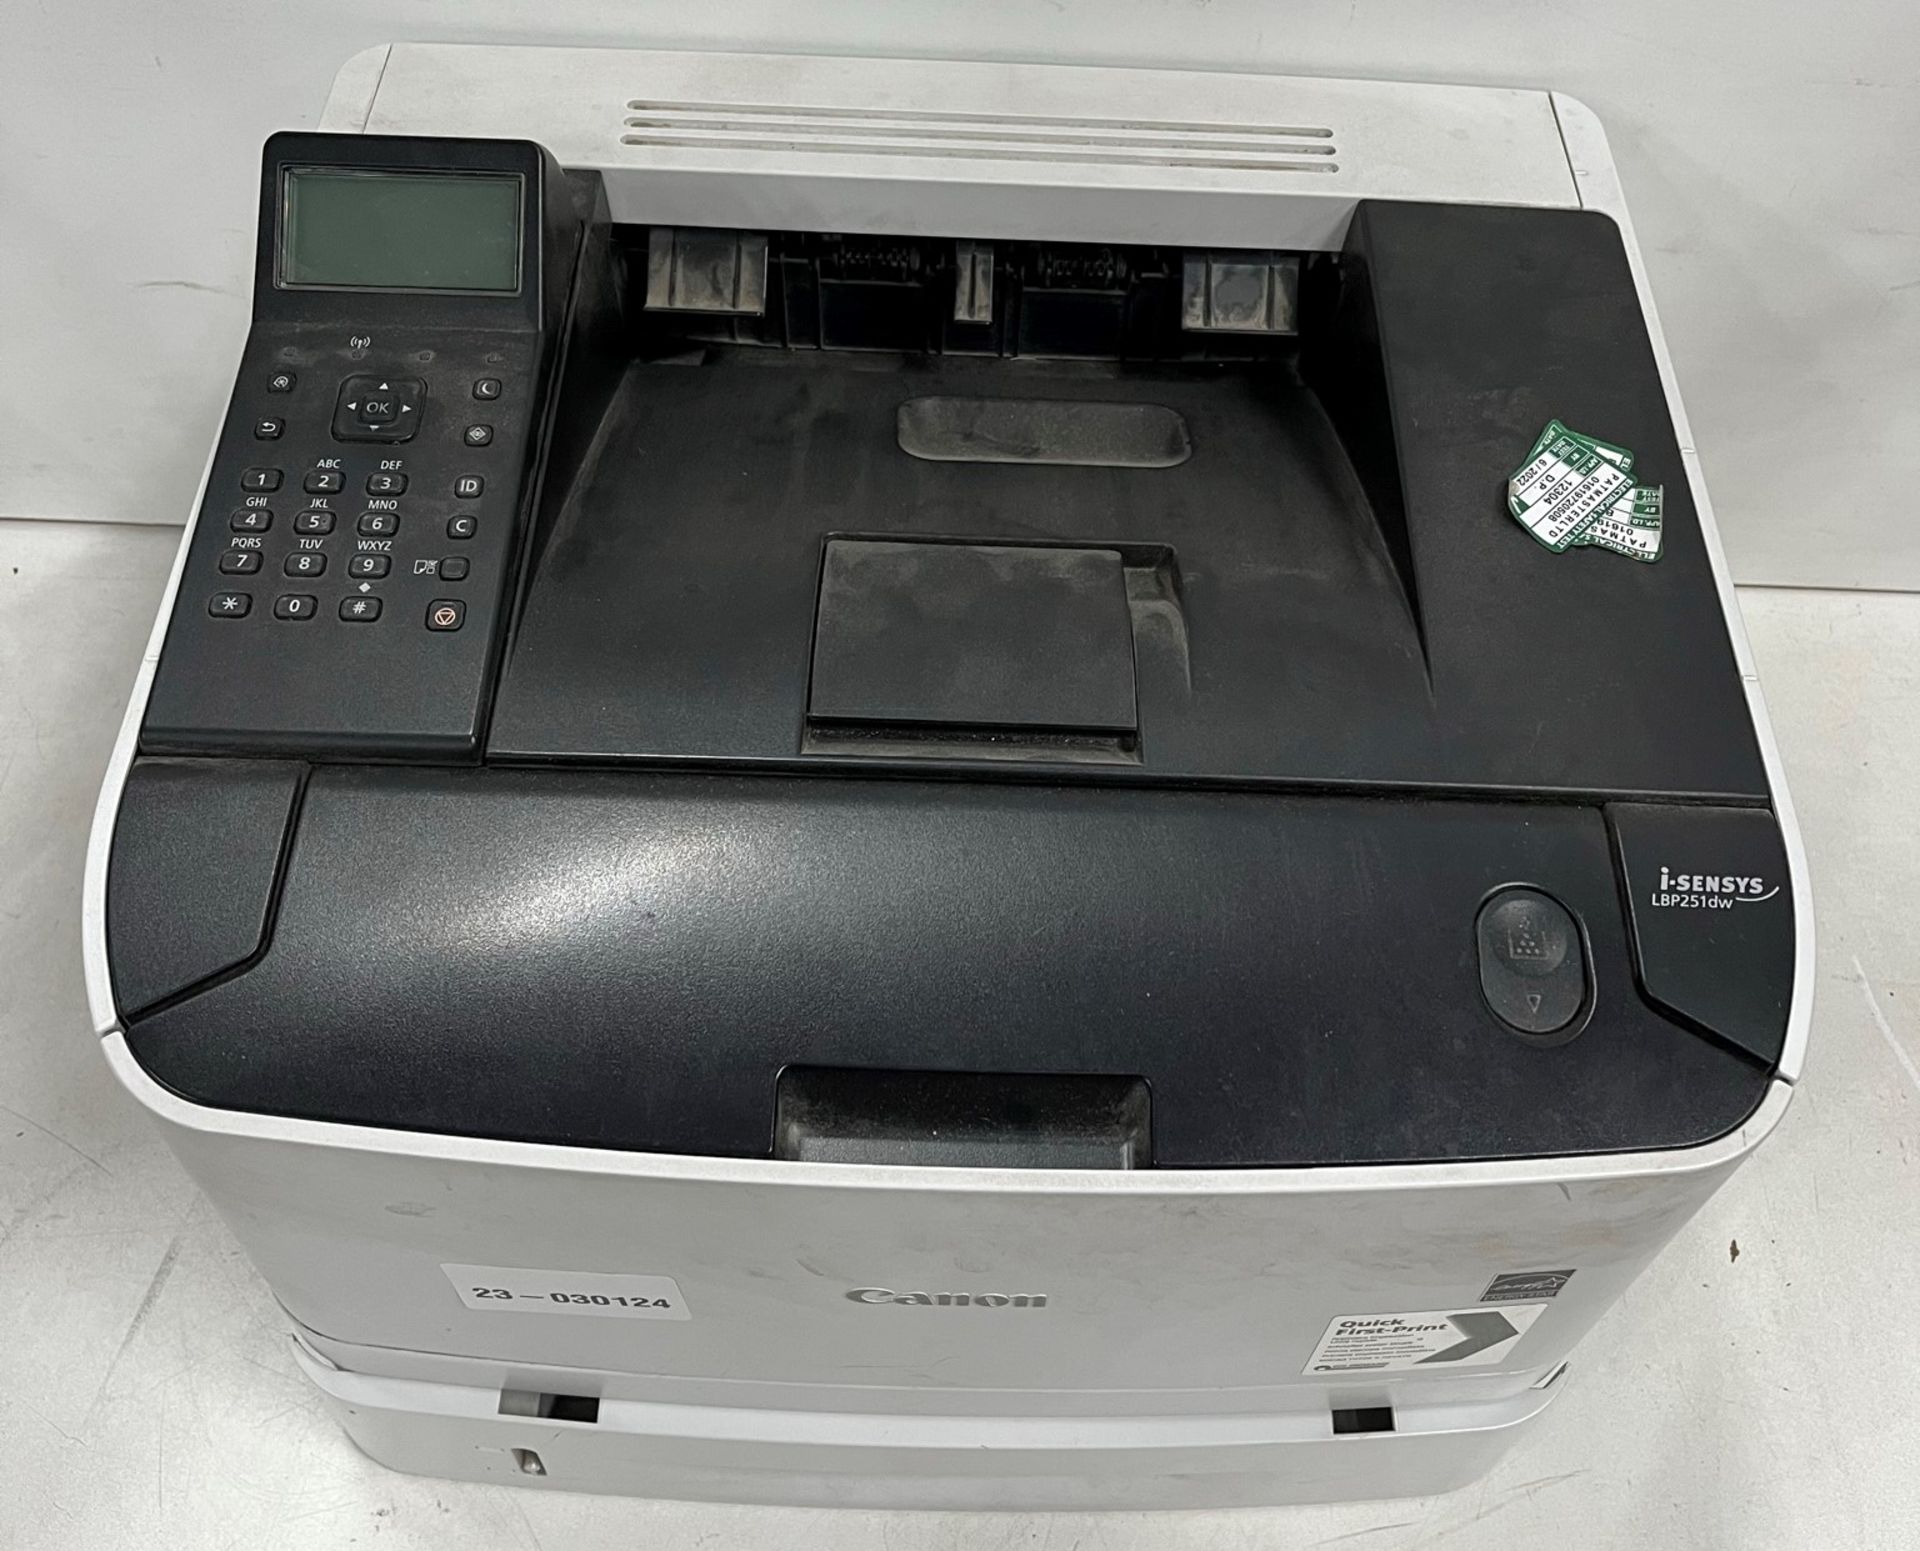 Cannon F161900 Multifunction Printer - Image 3 of 14